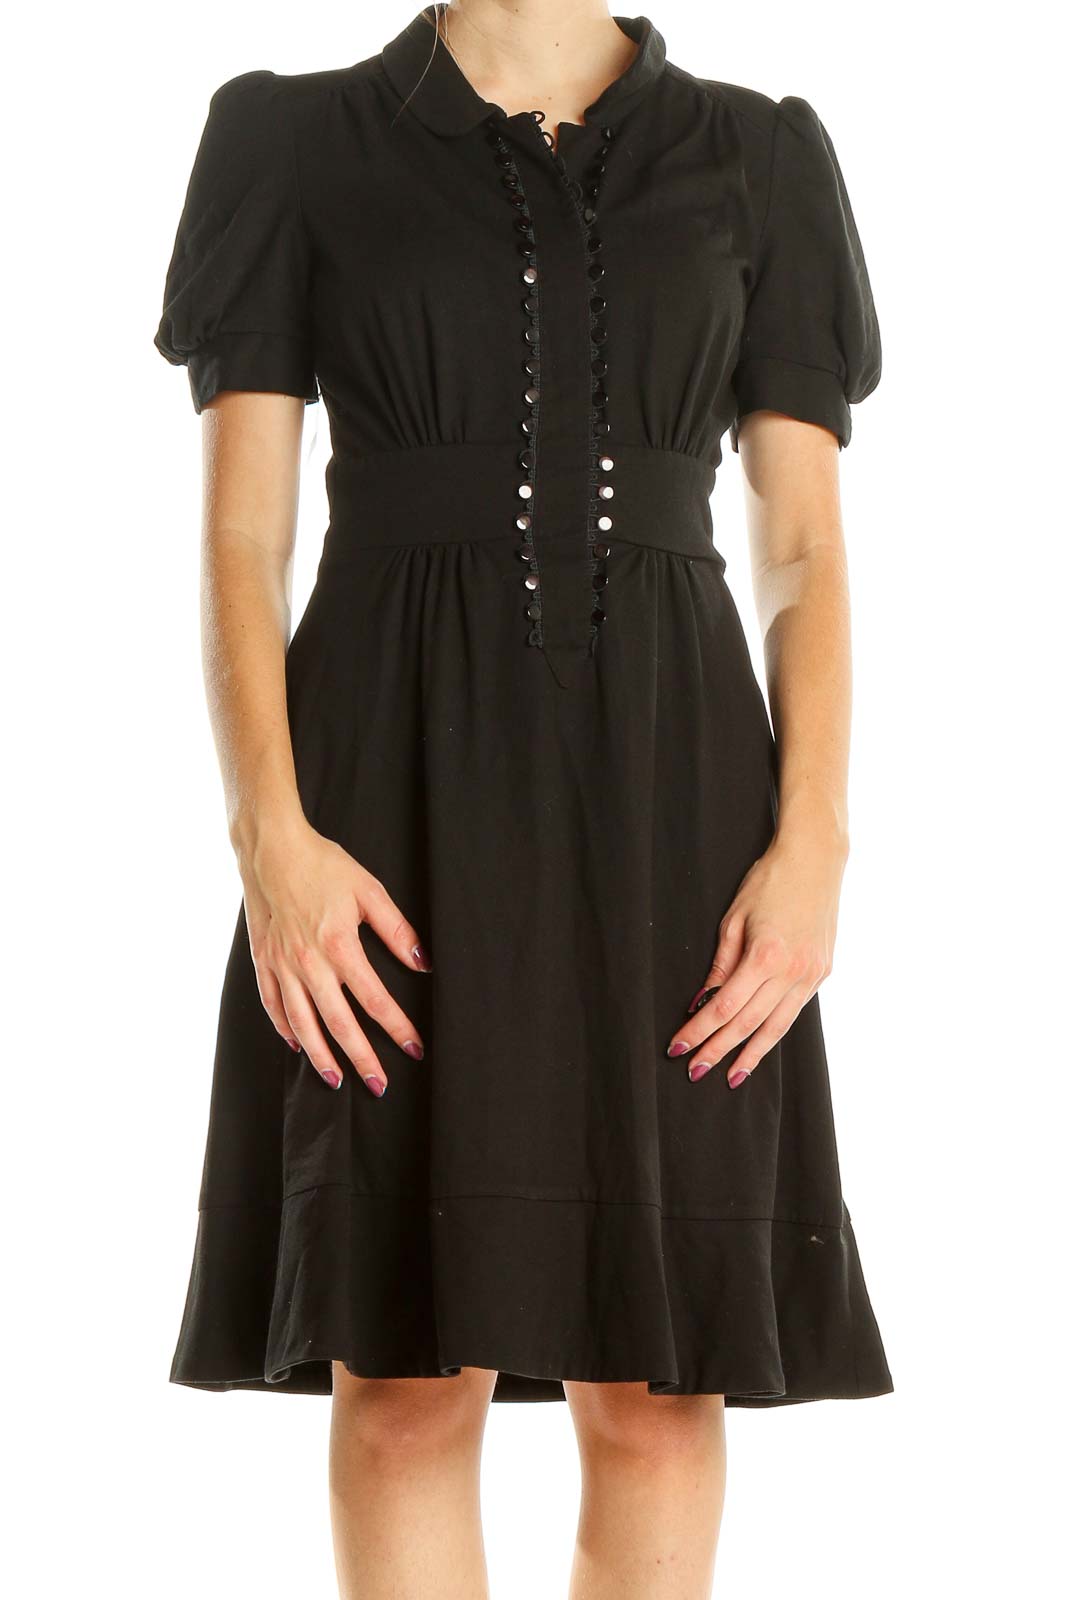 Black Classic Fit & Flare Dress With Button Detail Front